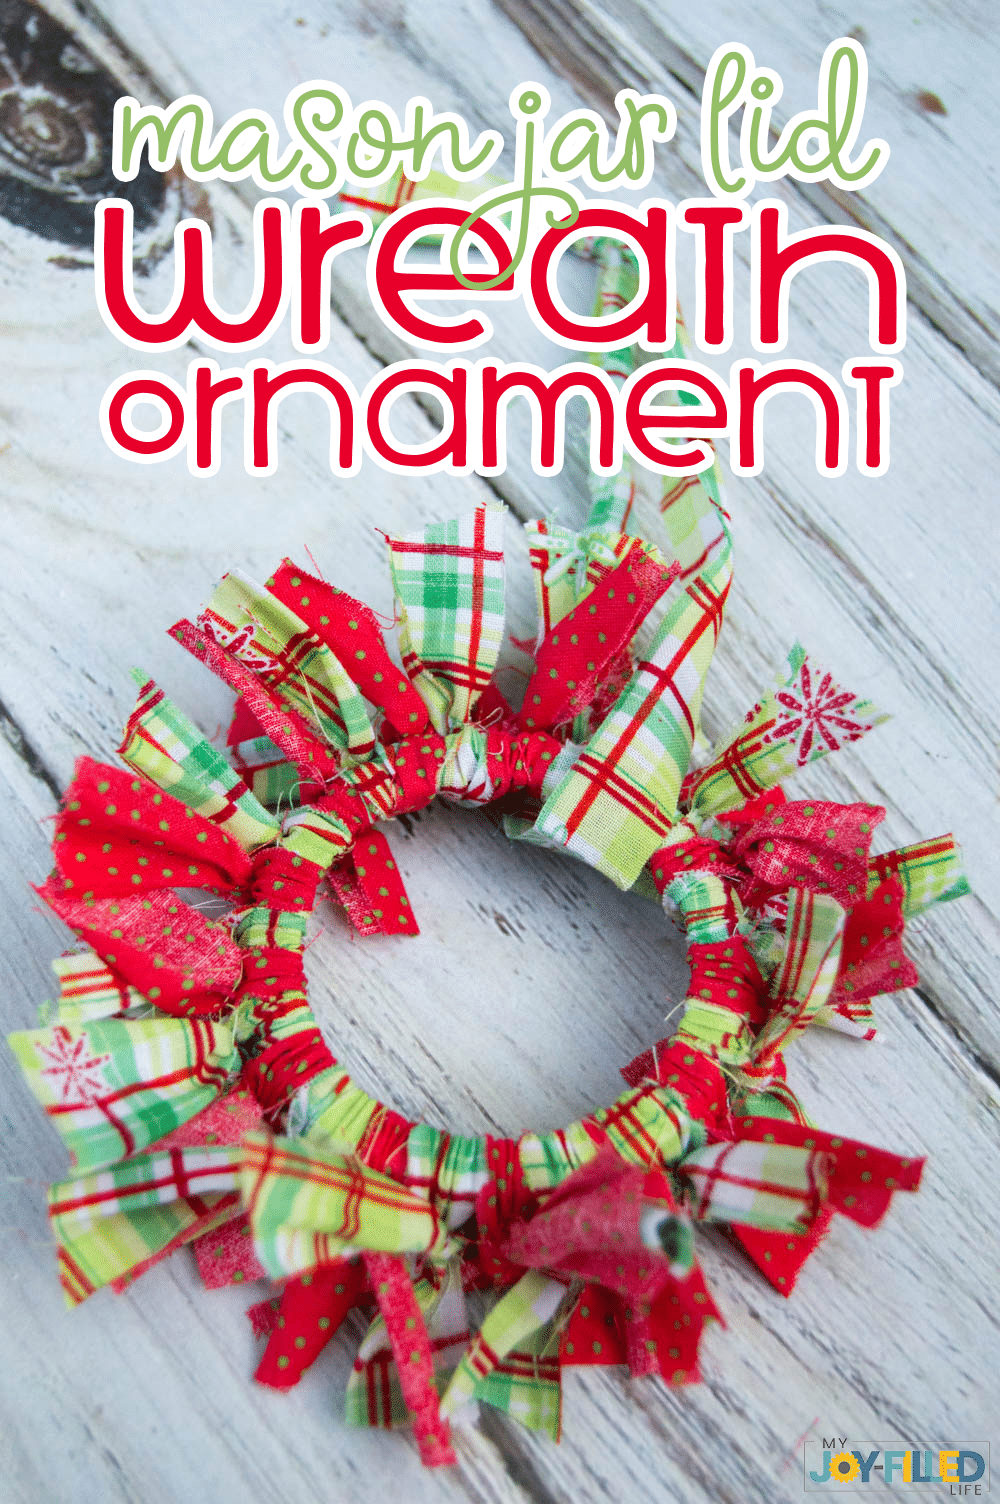 This mason jar lid wreath ornament is such a fun and easy homemade Christmas ornament! It makes a great gift and kids will love helping with this one. #Christmas #homemadechristmas #christmasornament #masonjar